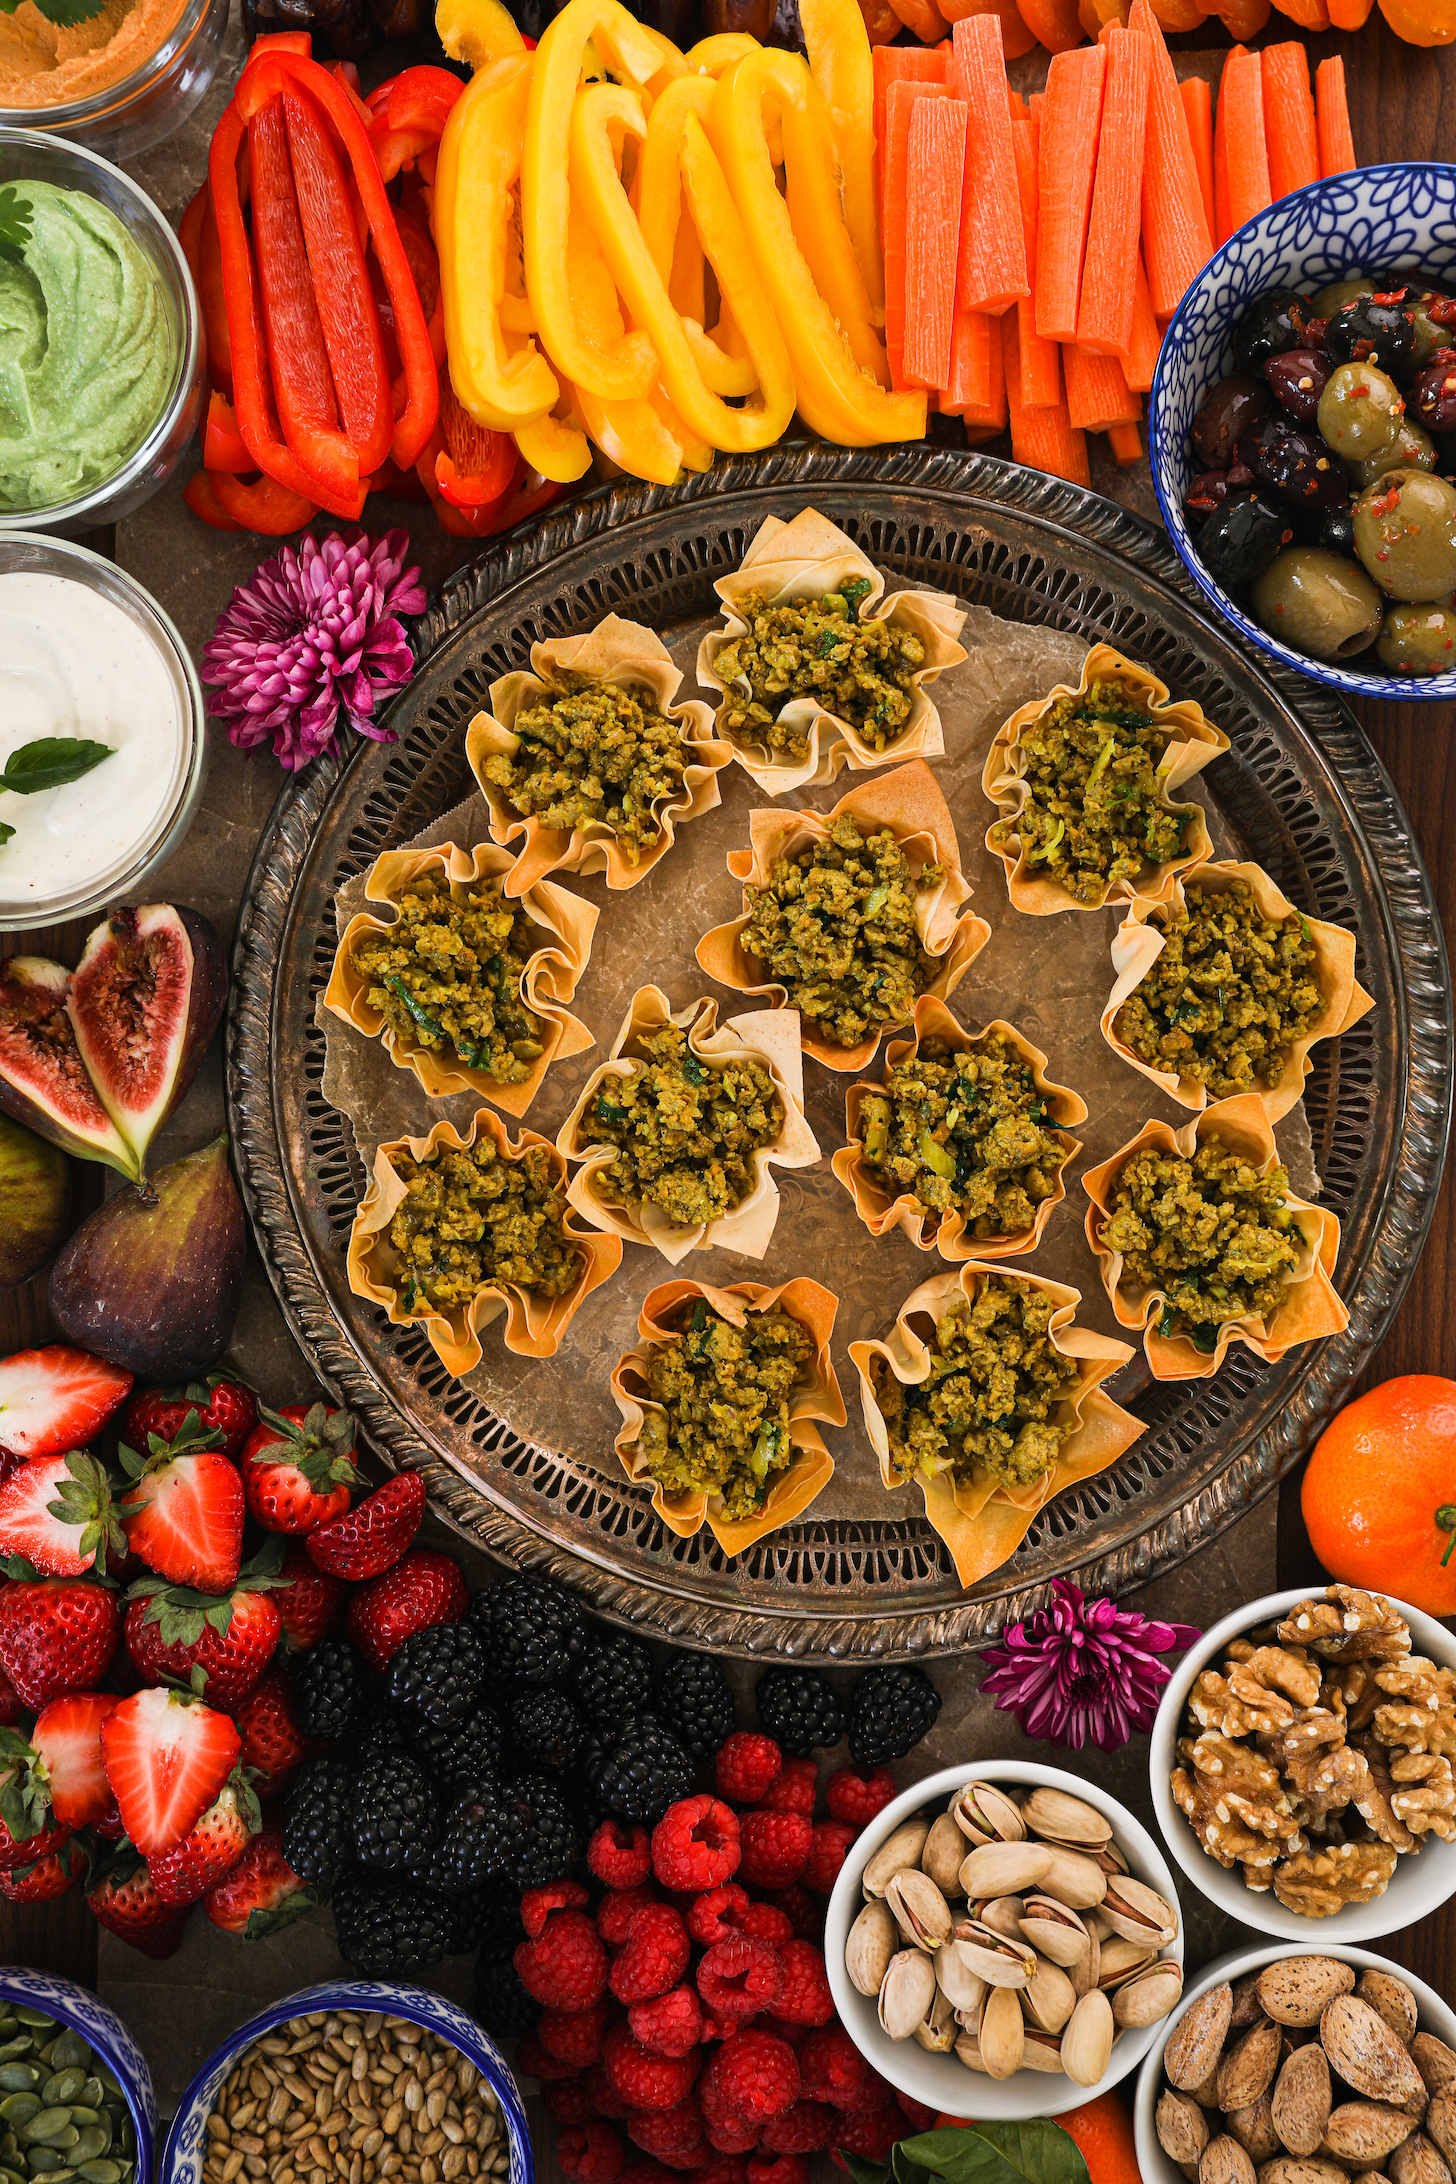 A beautiful and colourful display of food with a tray of baked pastry shells filled with chicken, fruits, veggies, nuts, olives, seeds and dips.